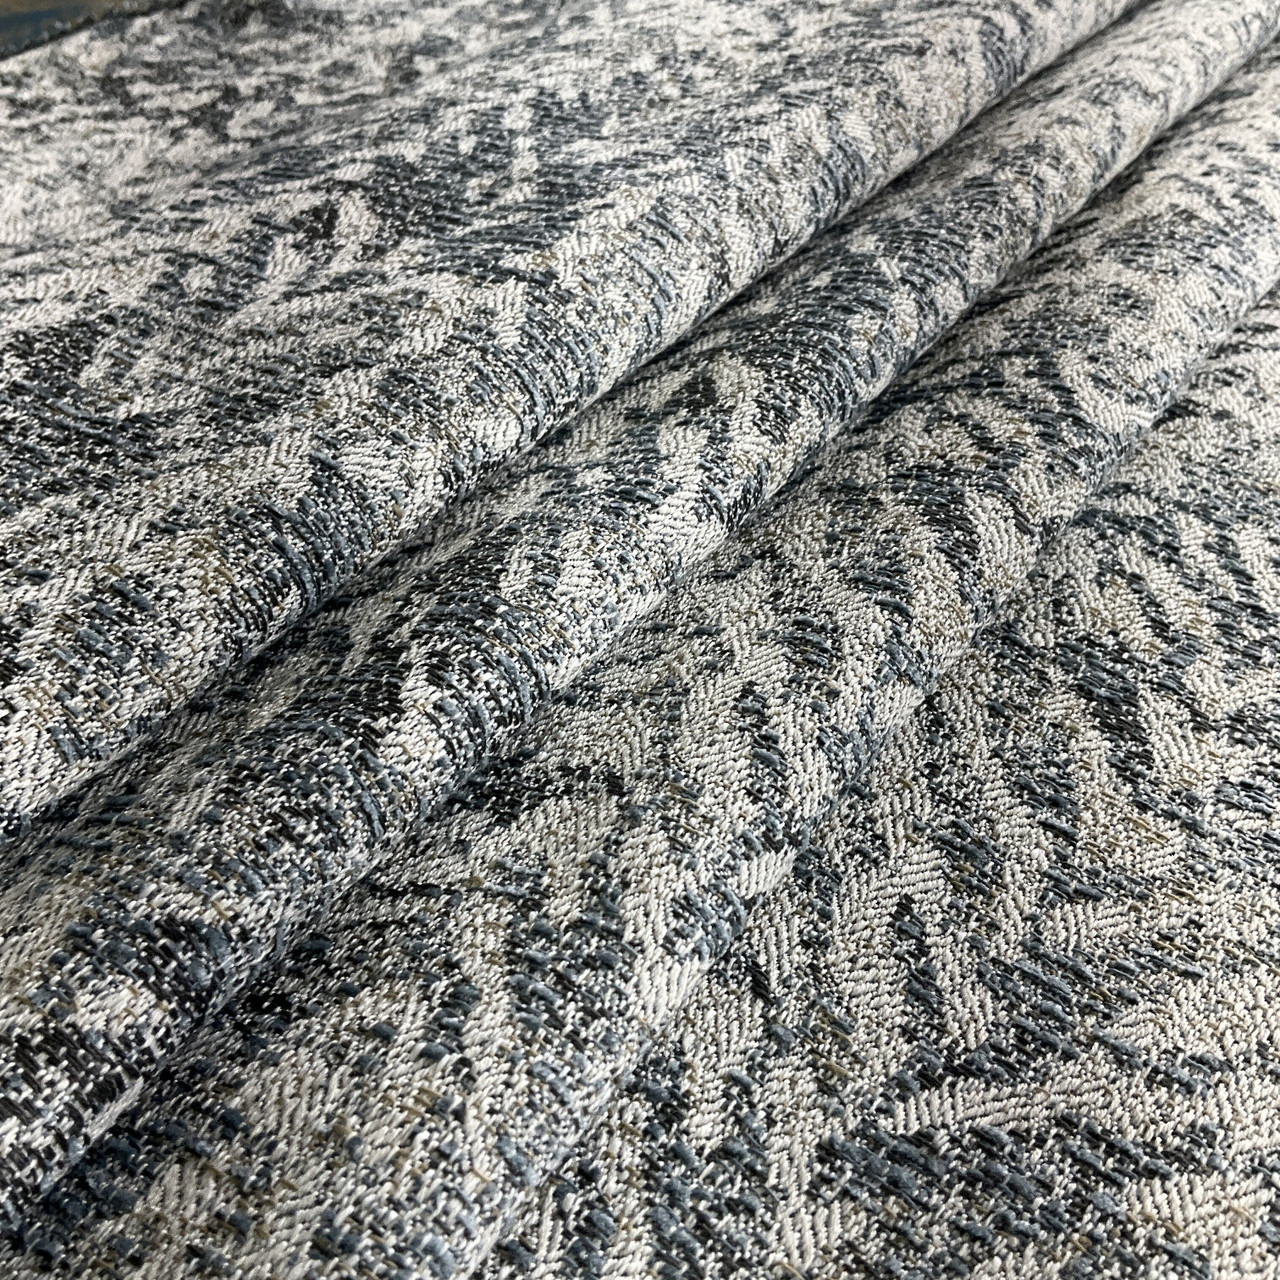 100% Cotton Denim Fabric by The Yard Stretch Denim Cloth Denim Durable  Denim Upholstery Fabric Perfect for Upholstery, Slipcovers, Pillows, Window